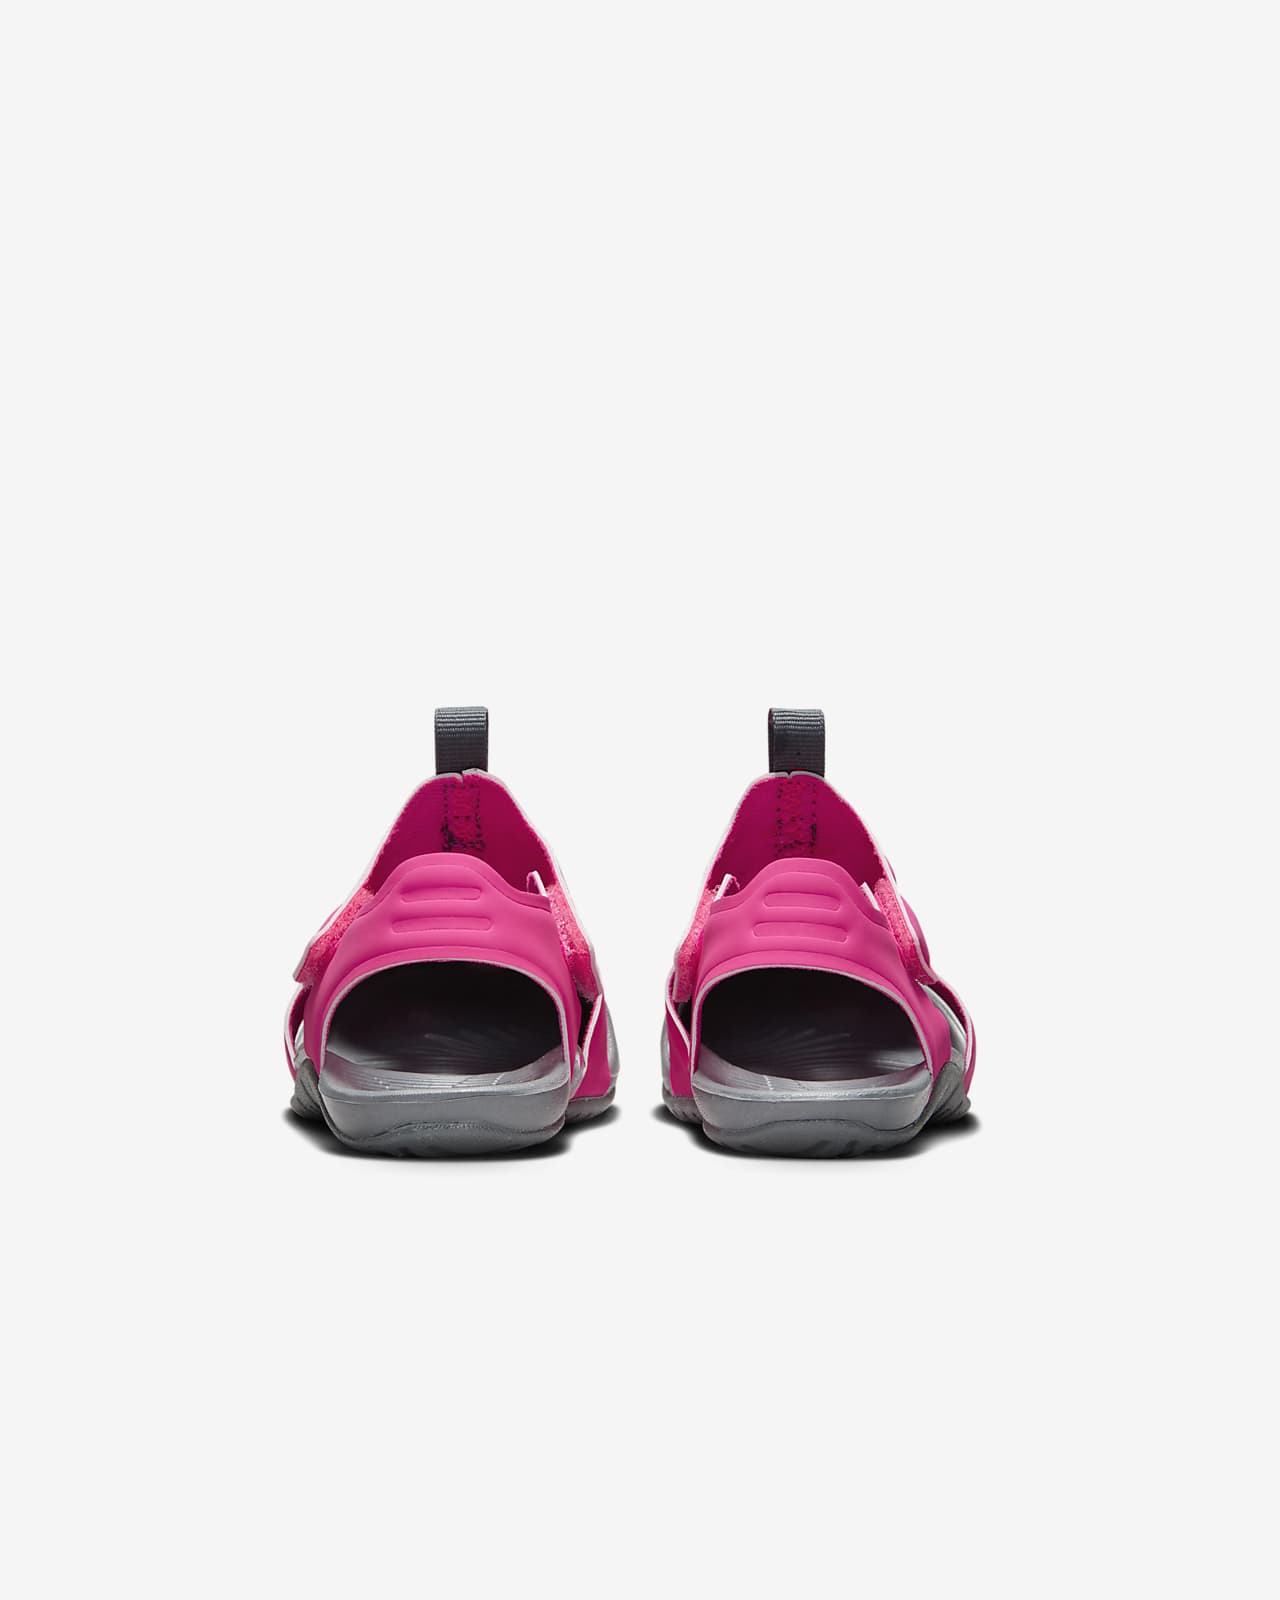 Nike Protect Baby/Toddler Sandals.